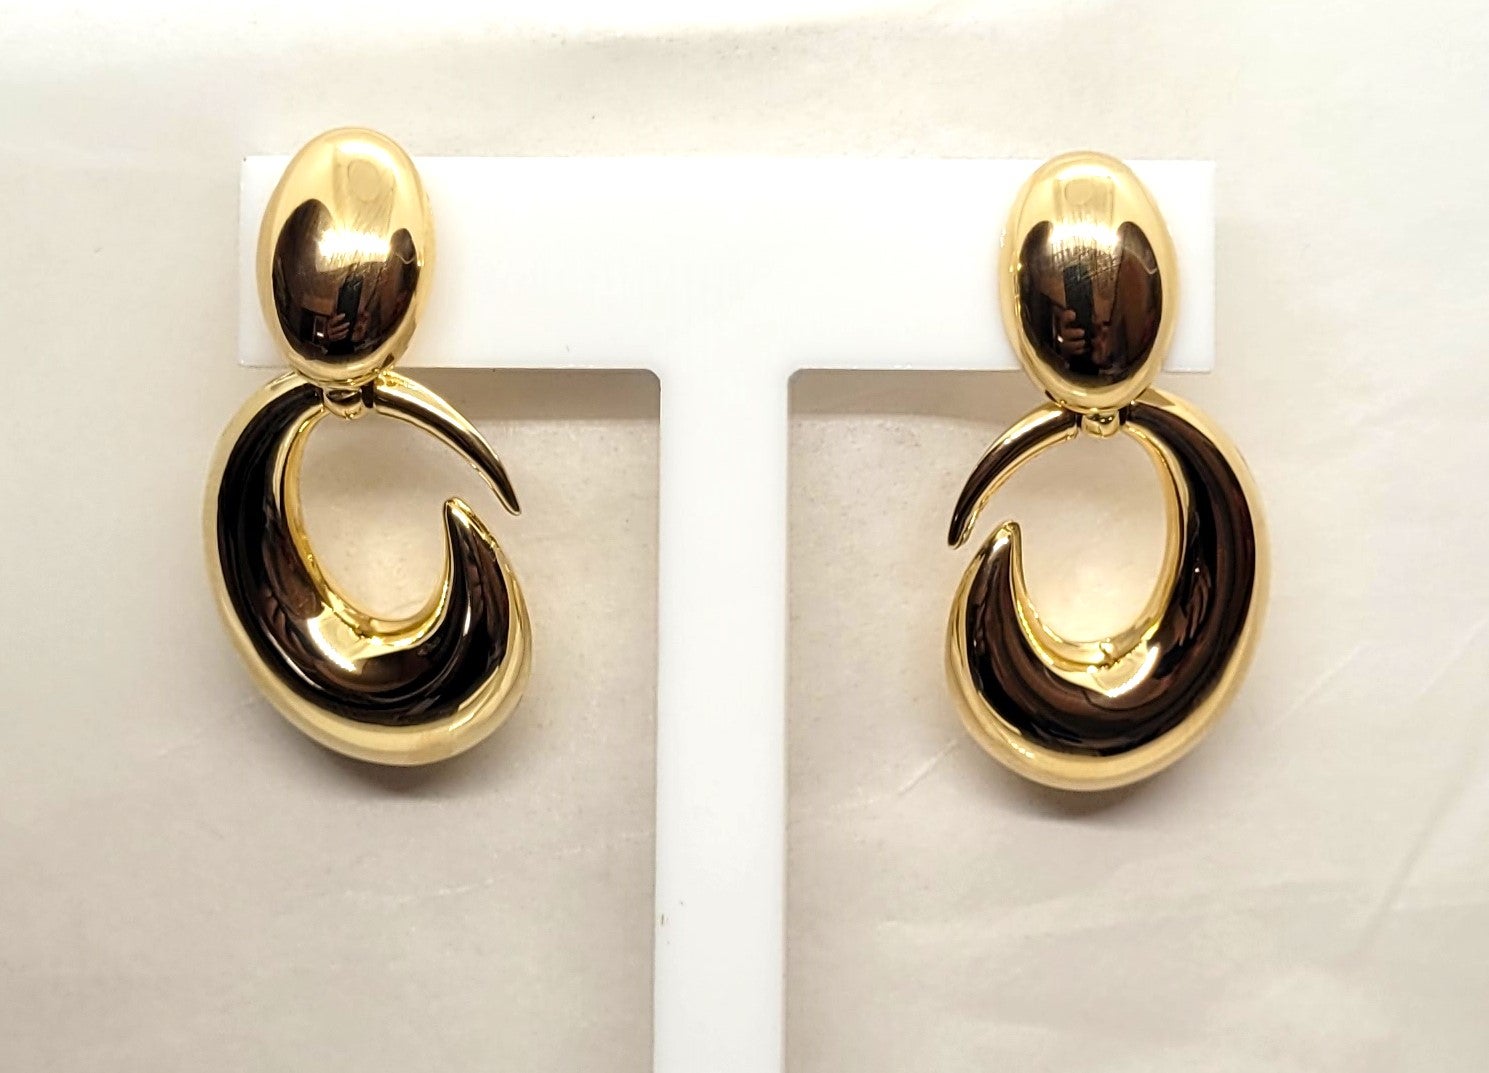 Beautiful 18kt Yellow Gold Earrings, Dangle Style, Uno Arerrre Designer, Italian-Made. These earrings are in very good condition. They are hollow, 9.8 grams, 41mm long, 21mm wide (at the widest point), and stamped 18k. They are secured with friction